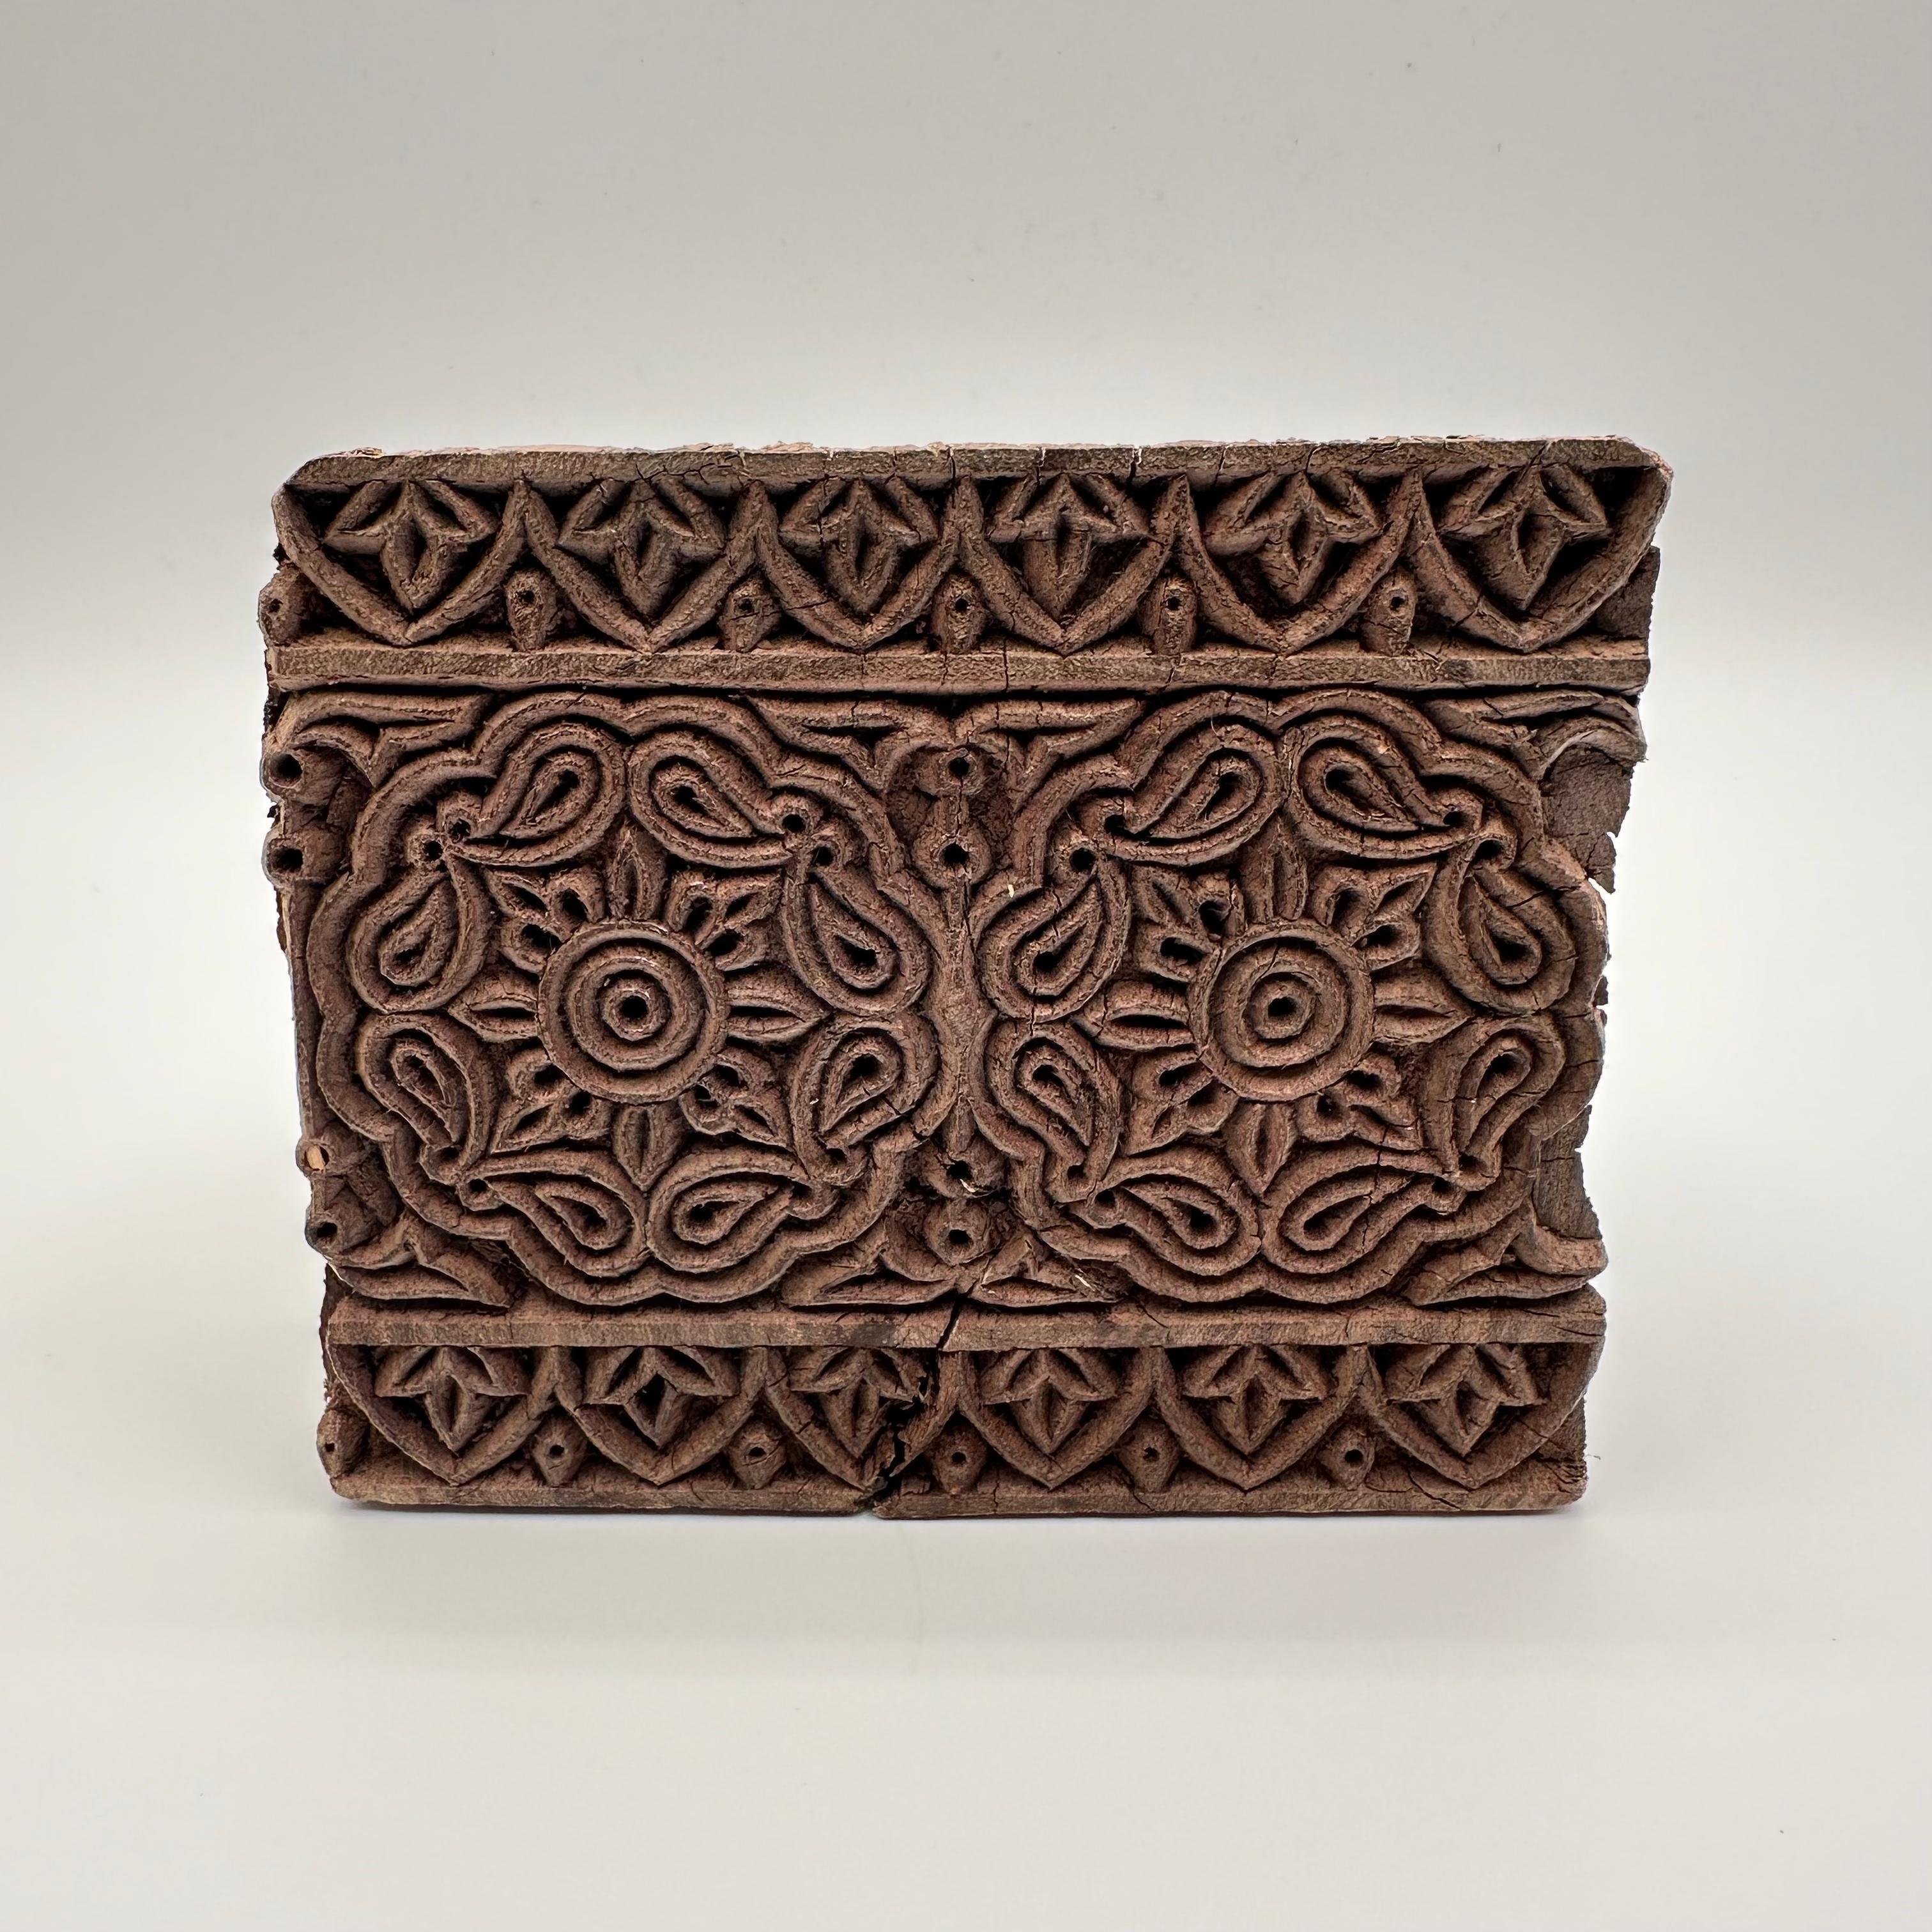 Amazing antique expertly hand-carved wood block with a floral and vegetal pattern that has been used in printing production. This now rustic piece shows signs of years of handling in the daily life of the printing process, while still being